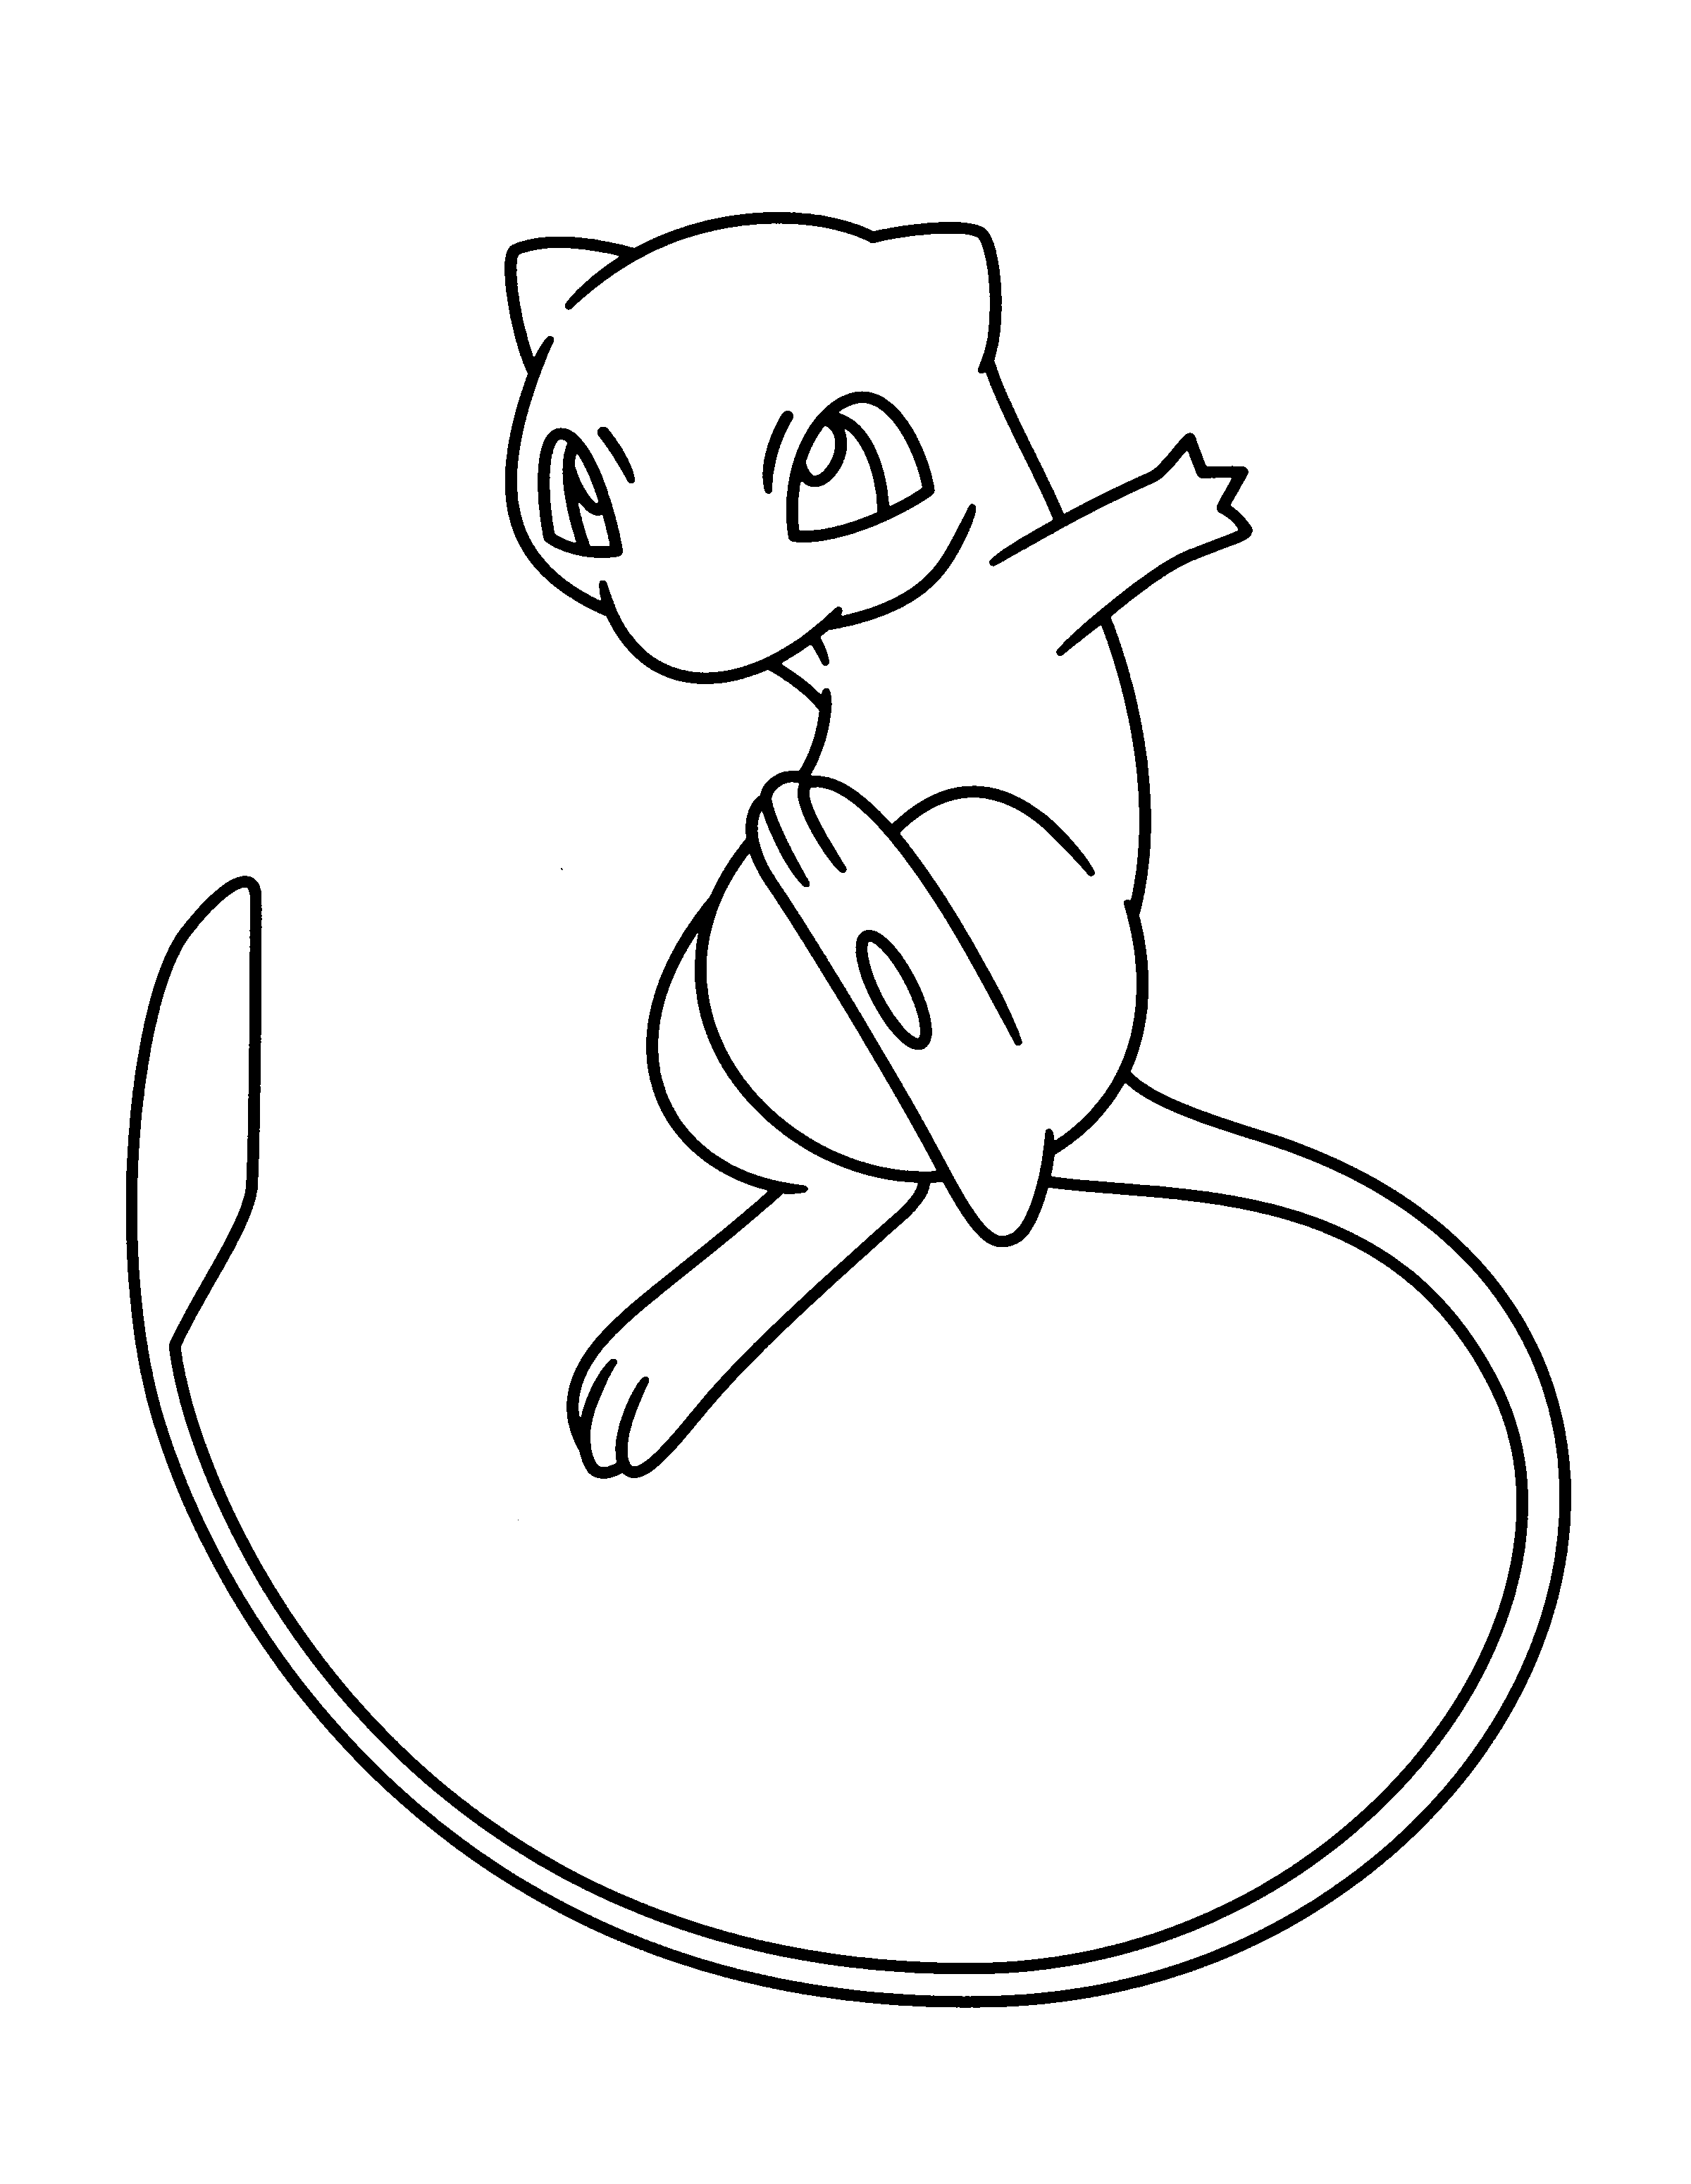 Mew coloring pages 2